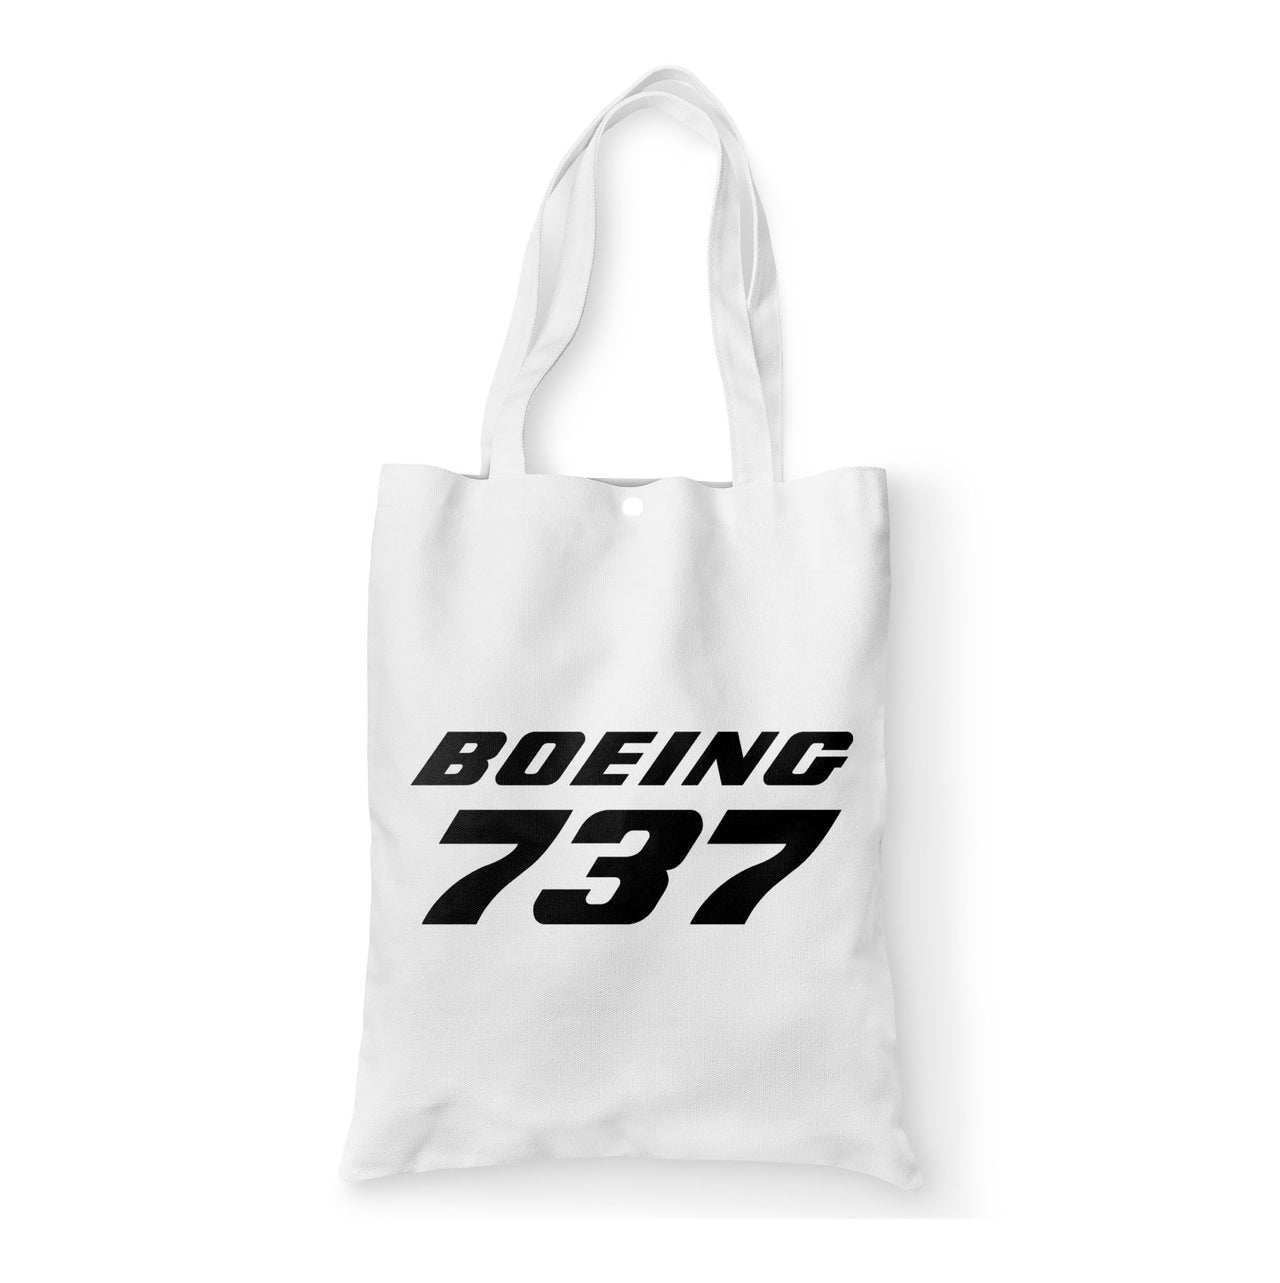 Boeing 737 & Text Designed Tote Bags